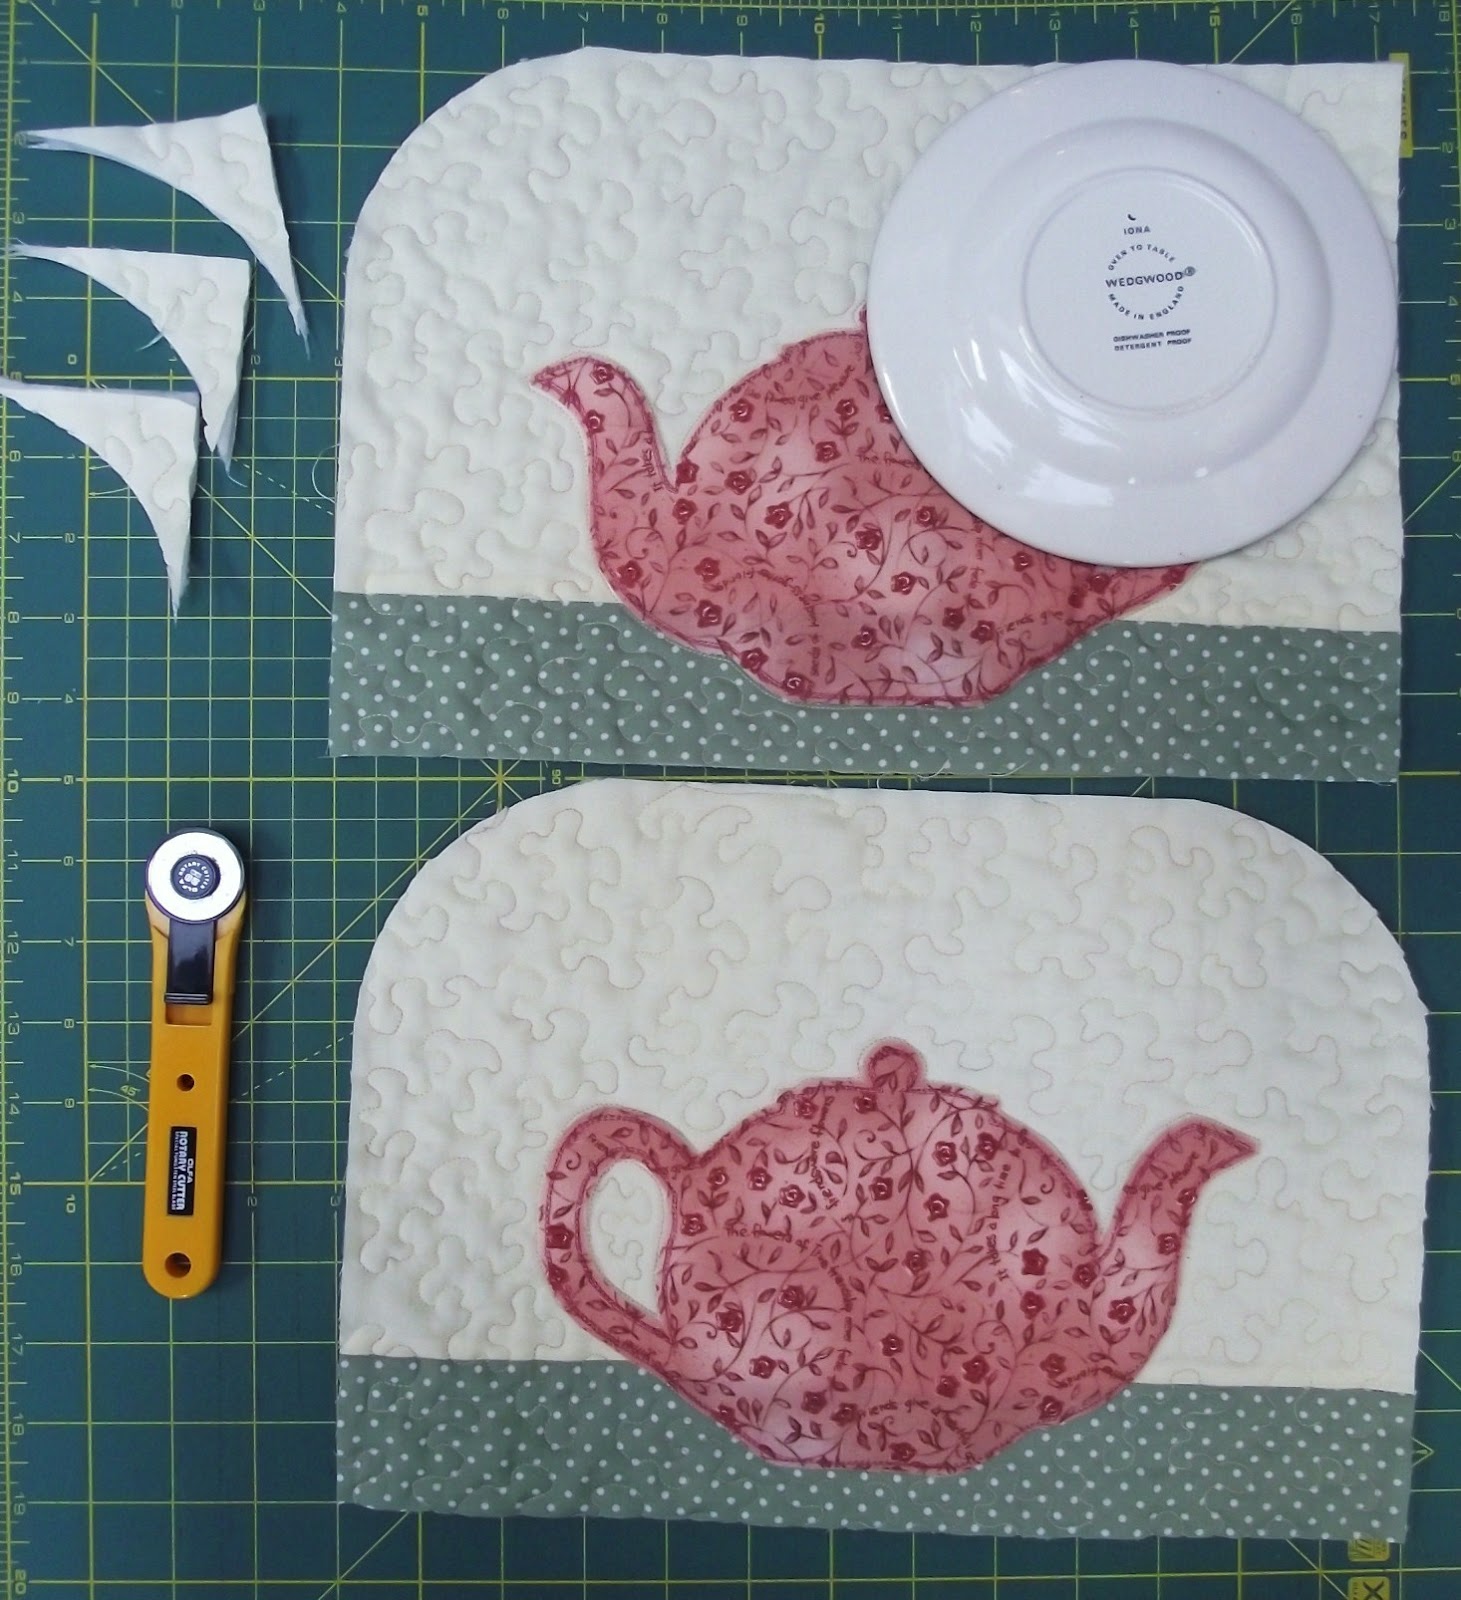 Lizzie Lenard Vintage Sewing: Making a Tea Cosy - Stage 3